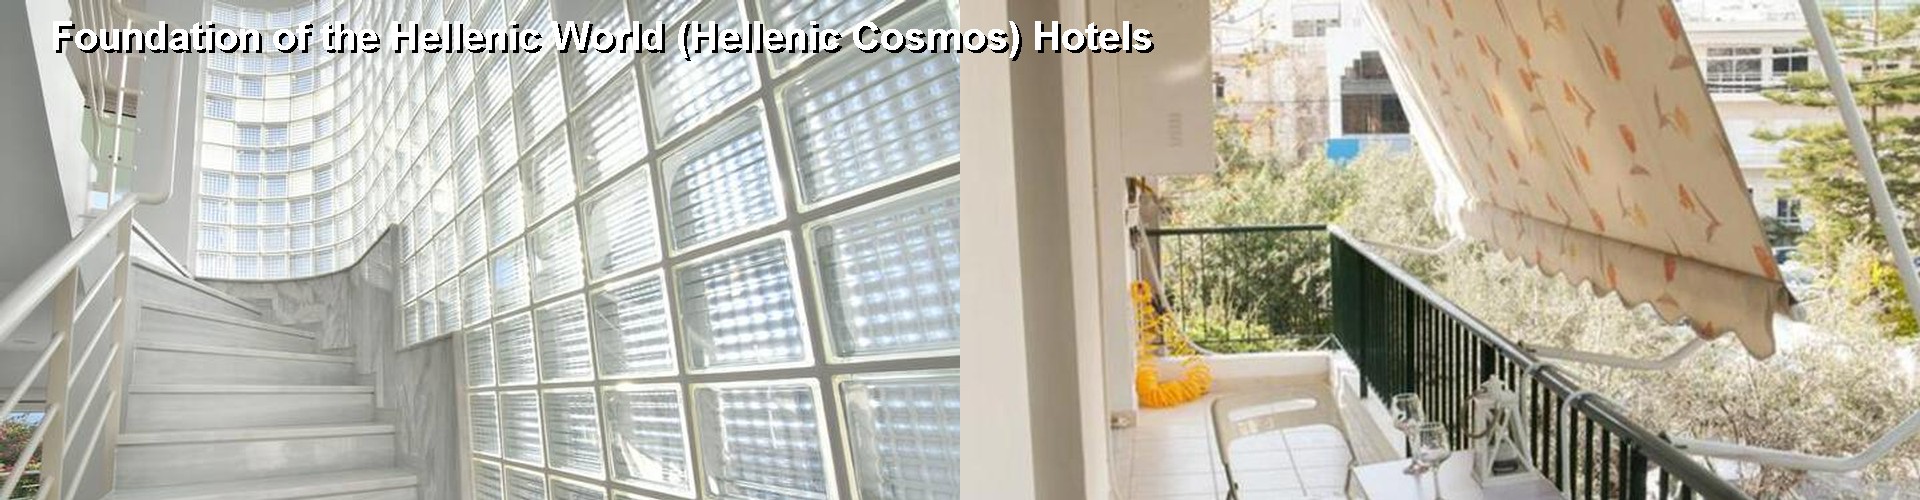 5 Best Hotels near Foundation of the Hellenic World (Hellenic Cosmos)